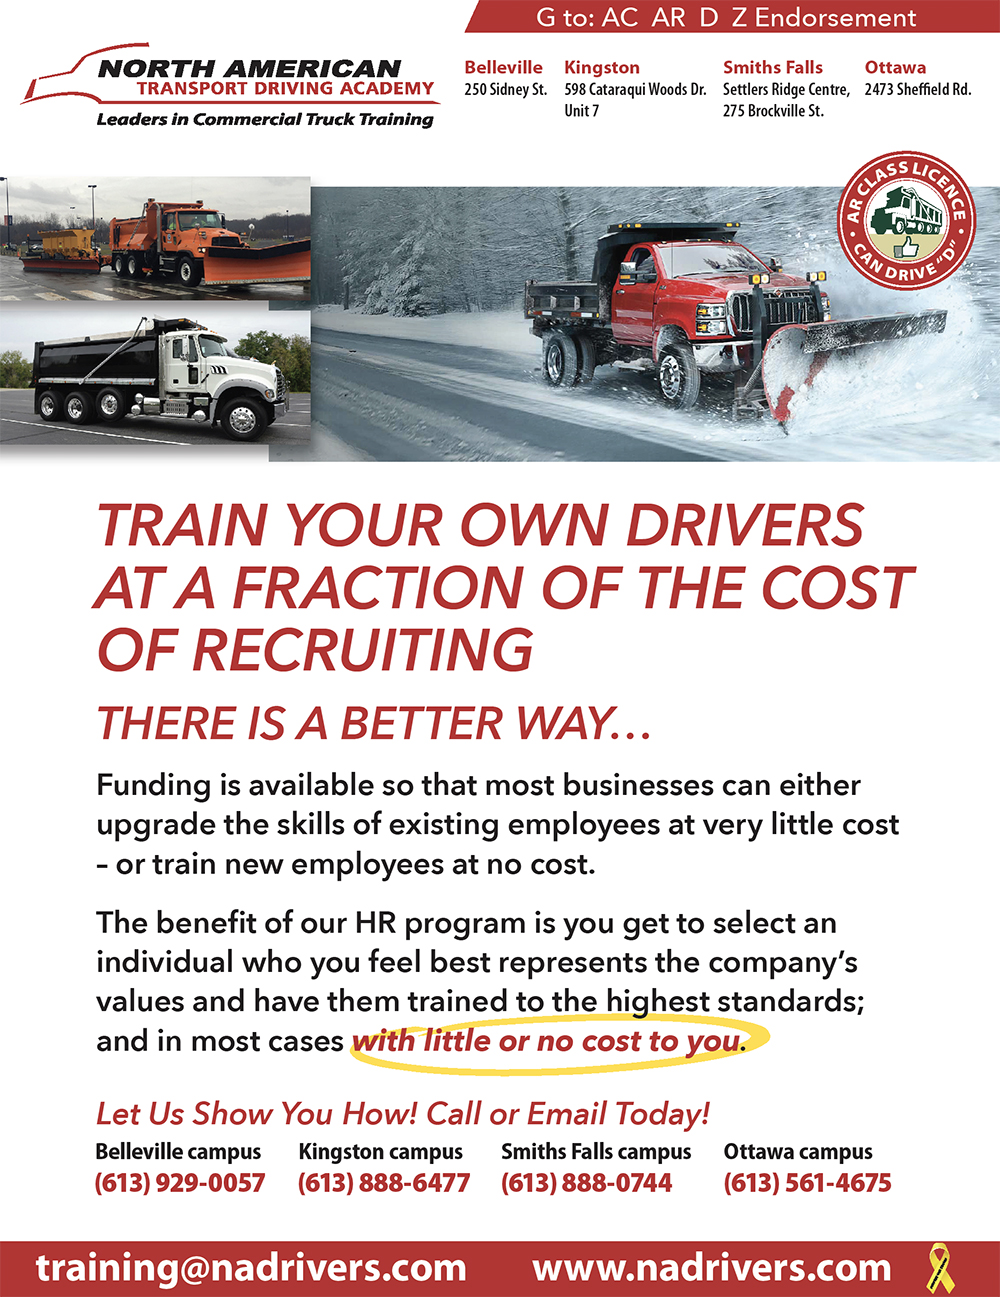 Train your own drivers at a fraction of the cost of recruiting